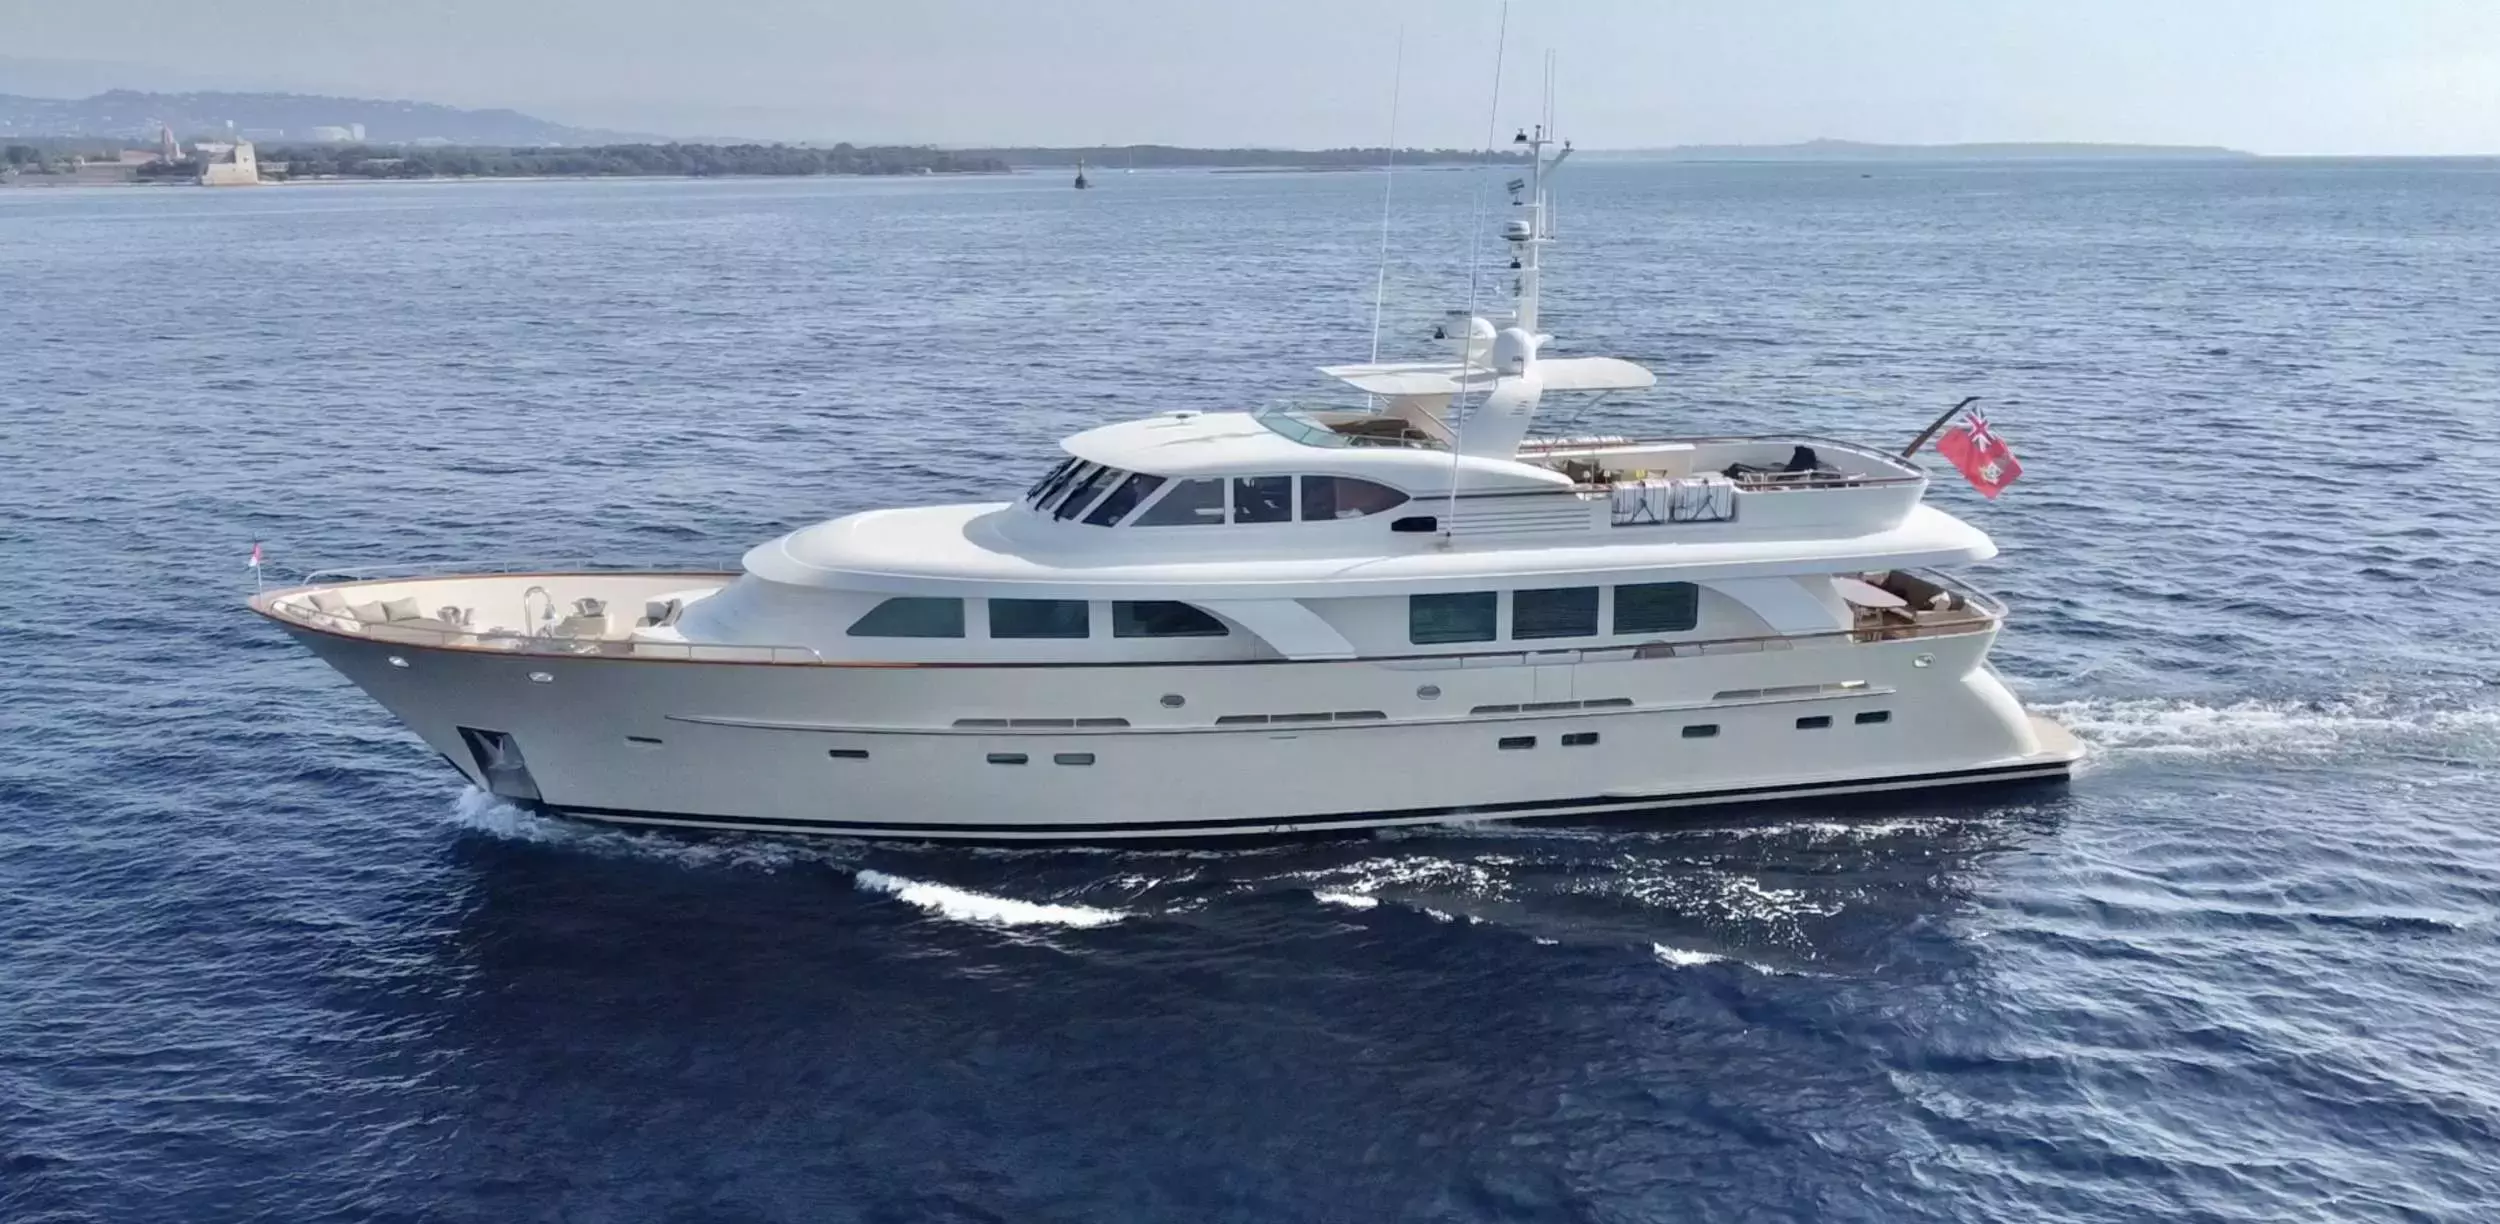 Orizzonte by Custom Made - Special Offer for a private Motor Yacht Charter in Cannes with a crew